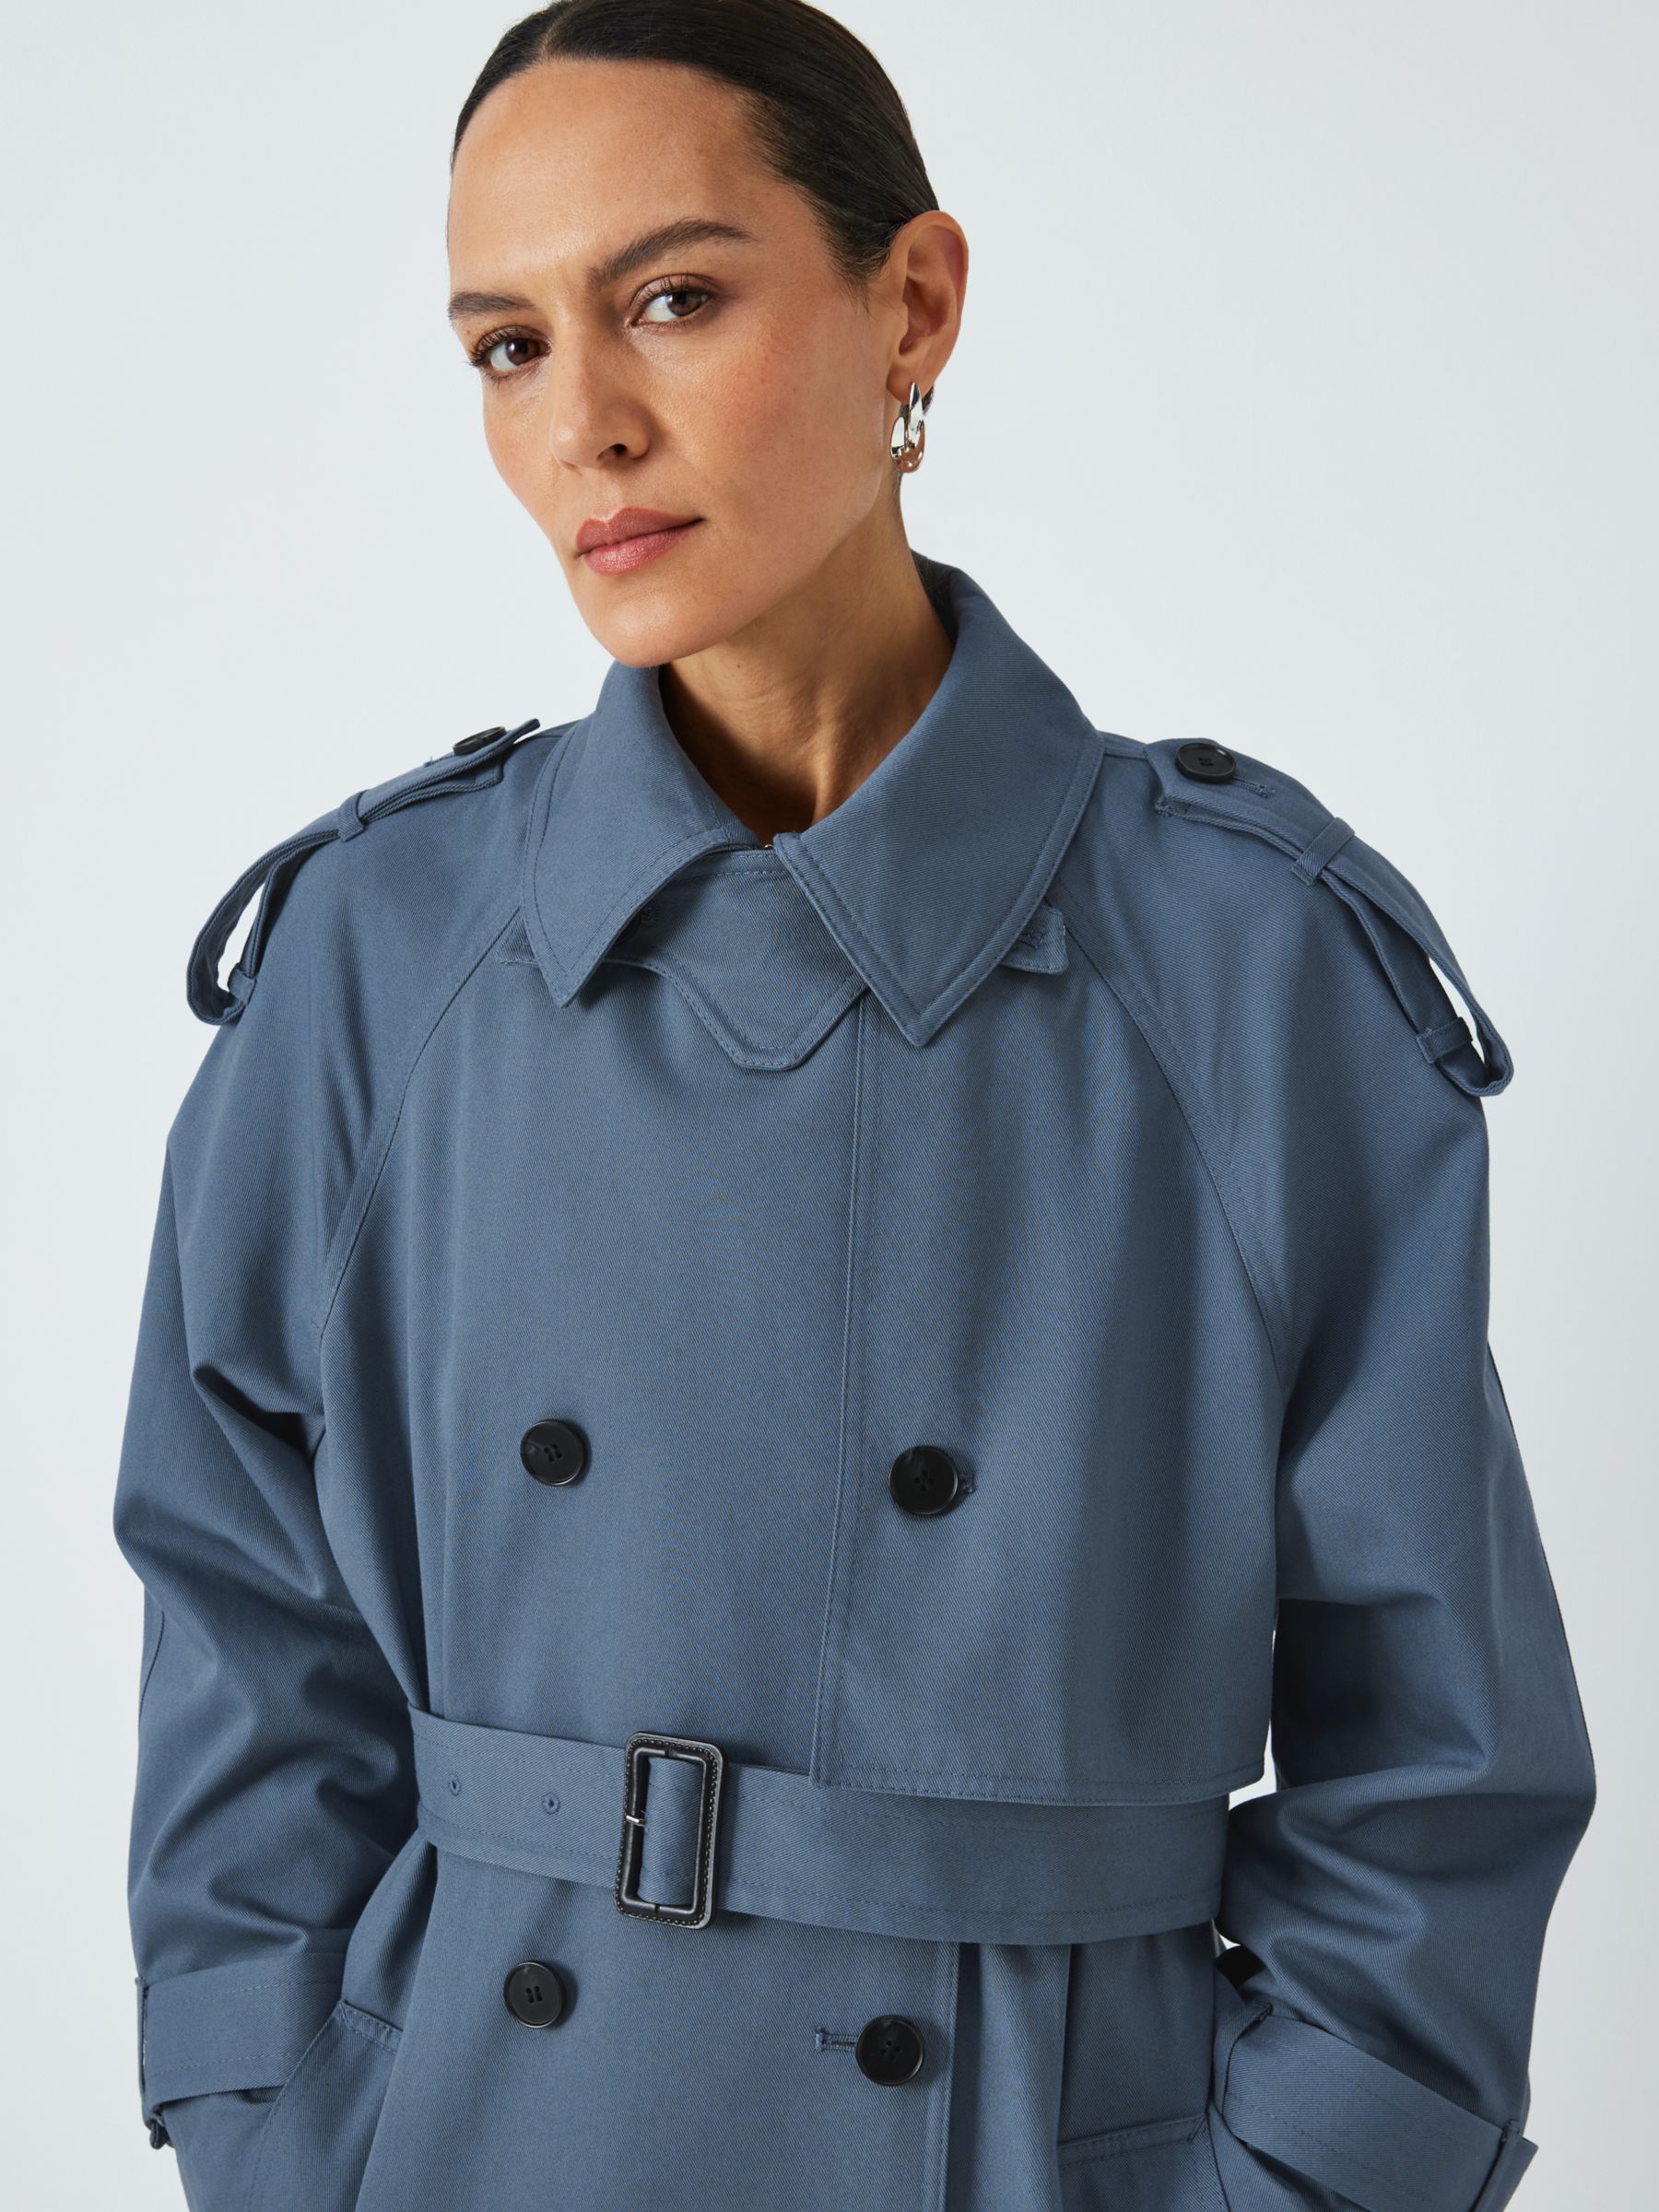 Buy John Lewis Contemporary Trench Coat Online at johnlewis.com